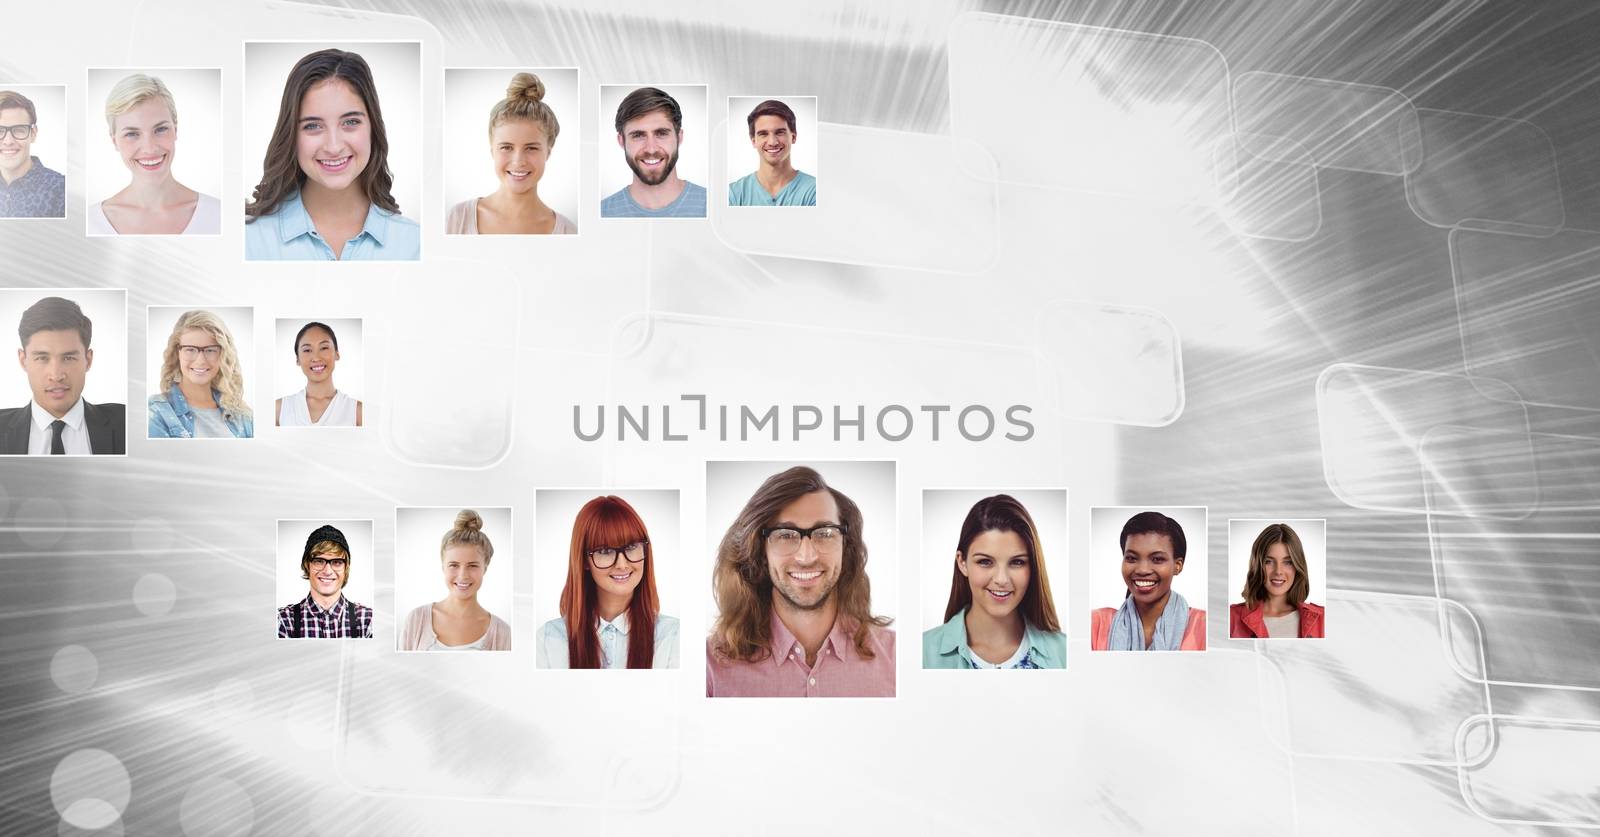 portrait profiles of different people by Wavebreakmedia